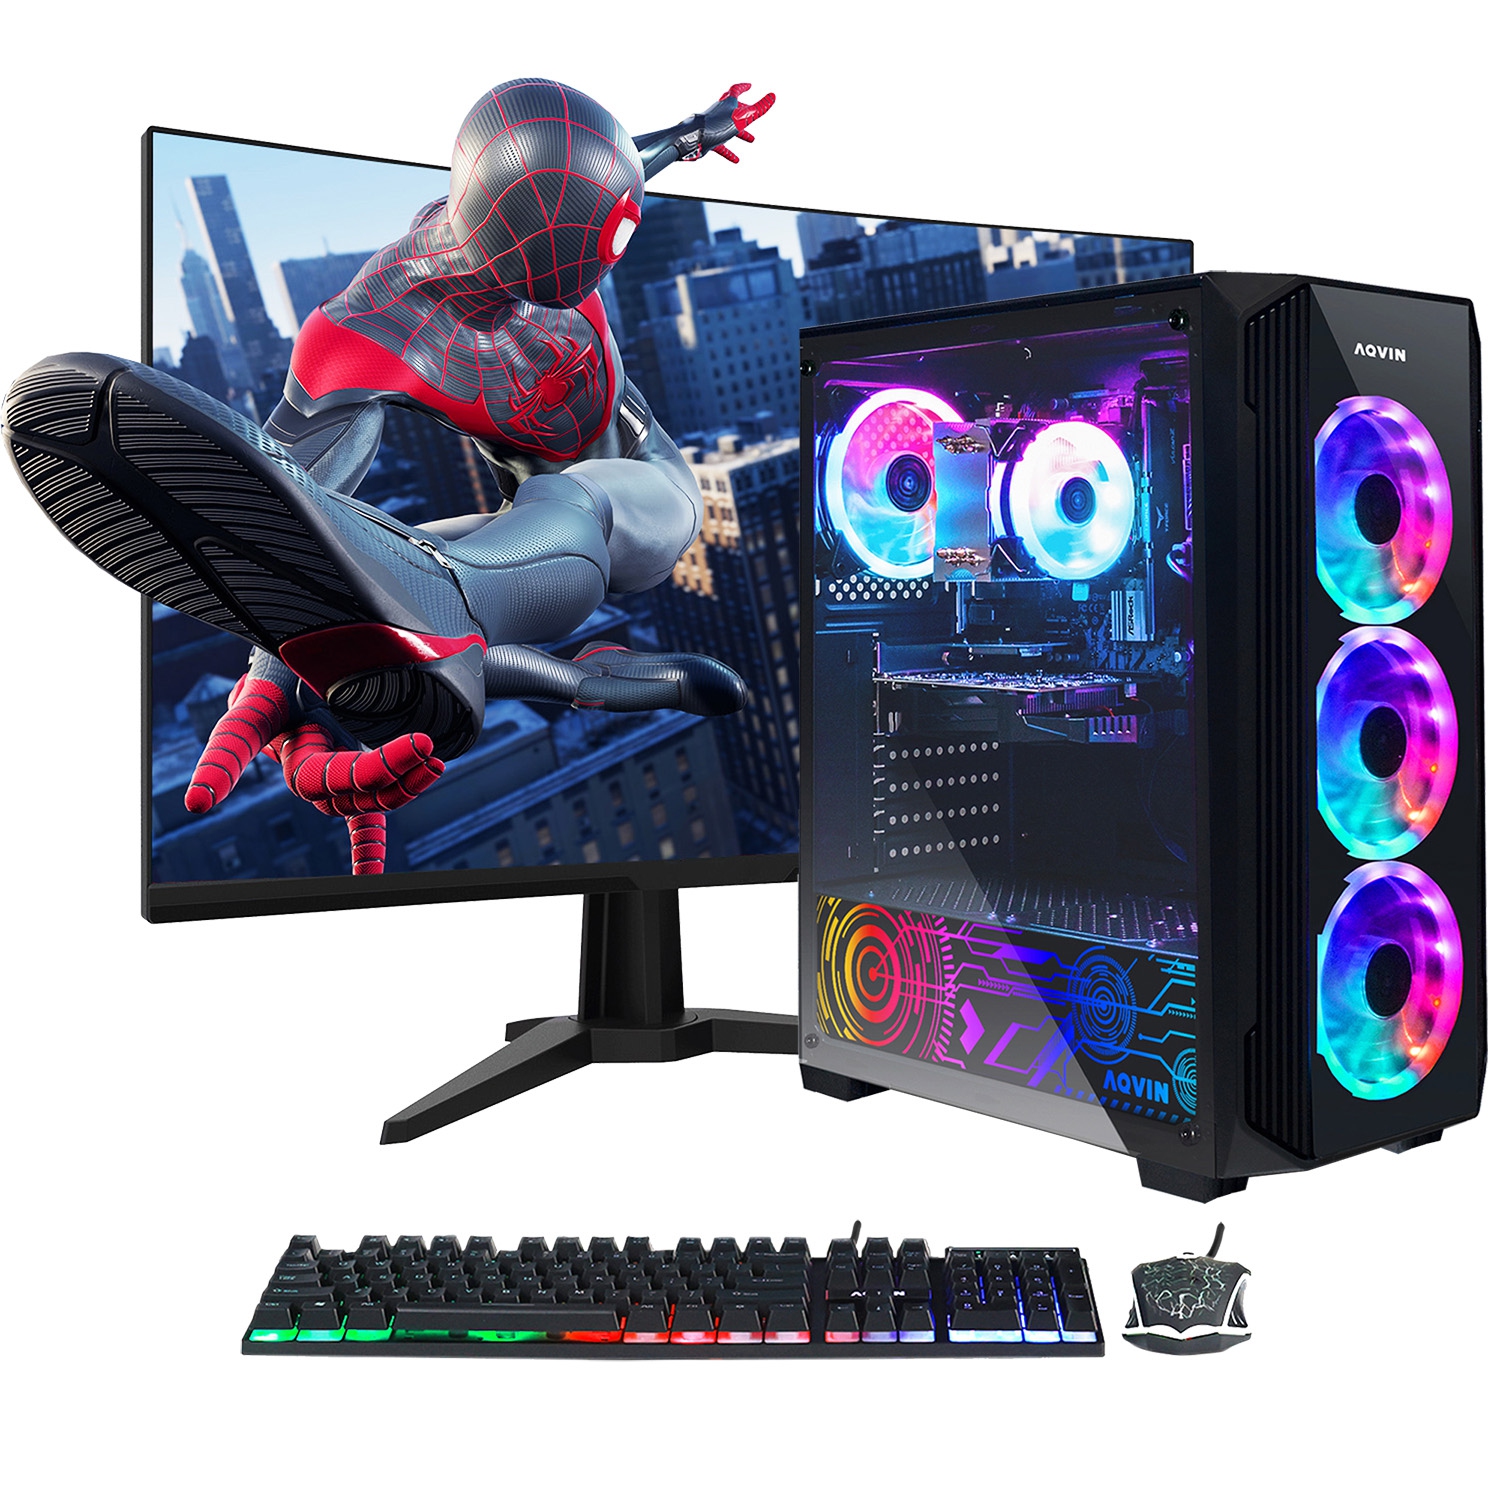 Refurbished (Excellent) AQVIN Gaming PC Desktop Computer Tower (Intel i7/1TB SSD/32GB RAM/GeForce RTX 3060/Windows 10 Pro) New 24 inch Curved Gaming Monitor - Only at Best Buy